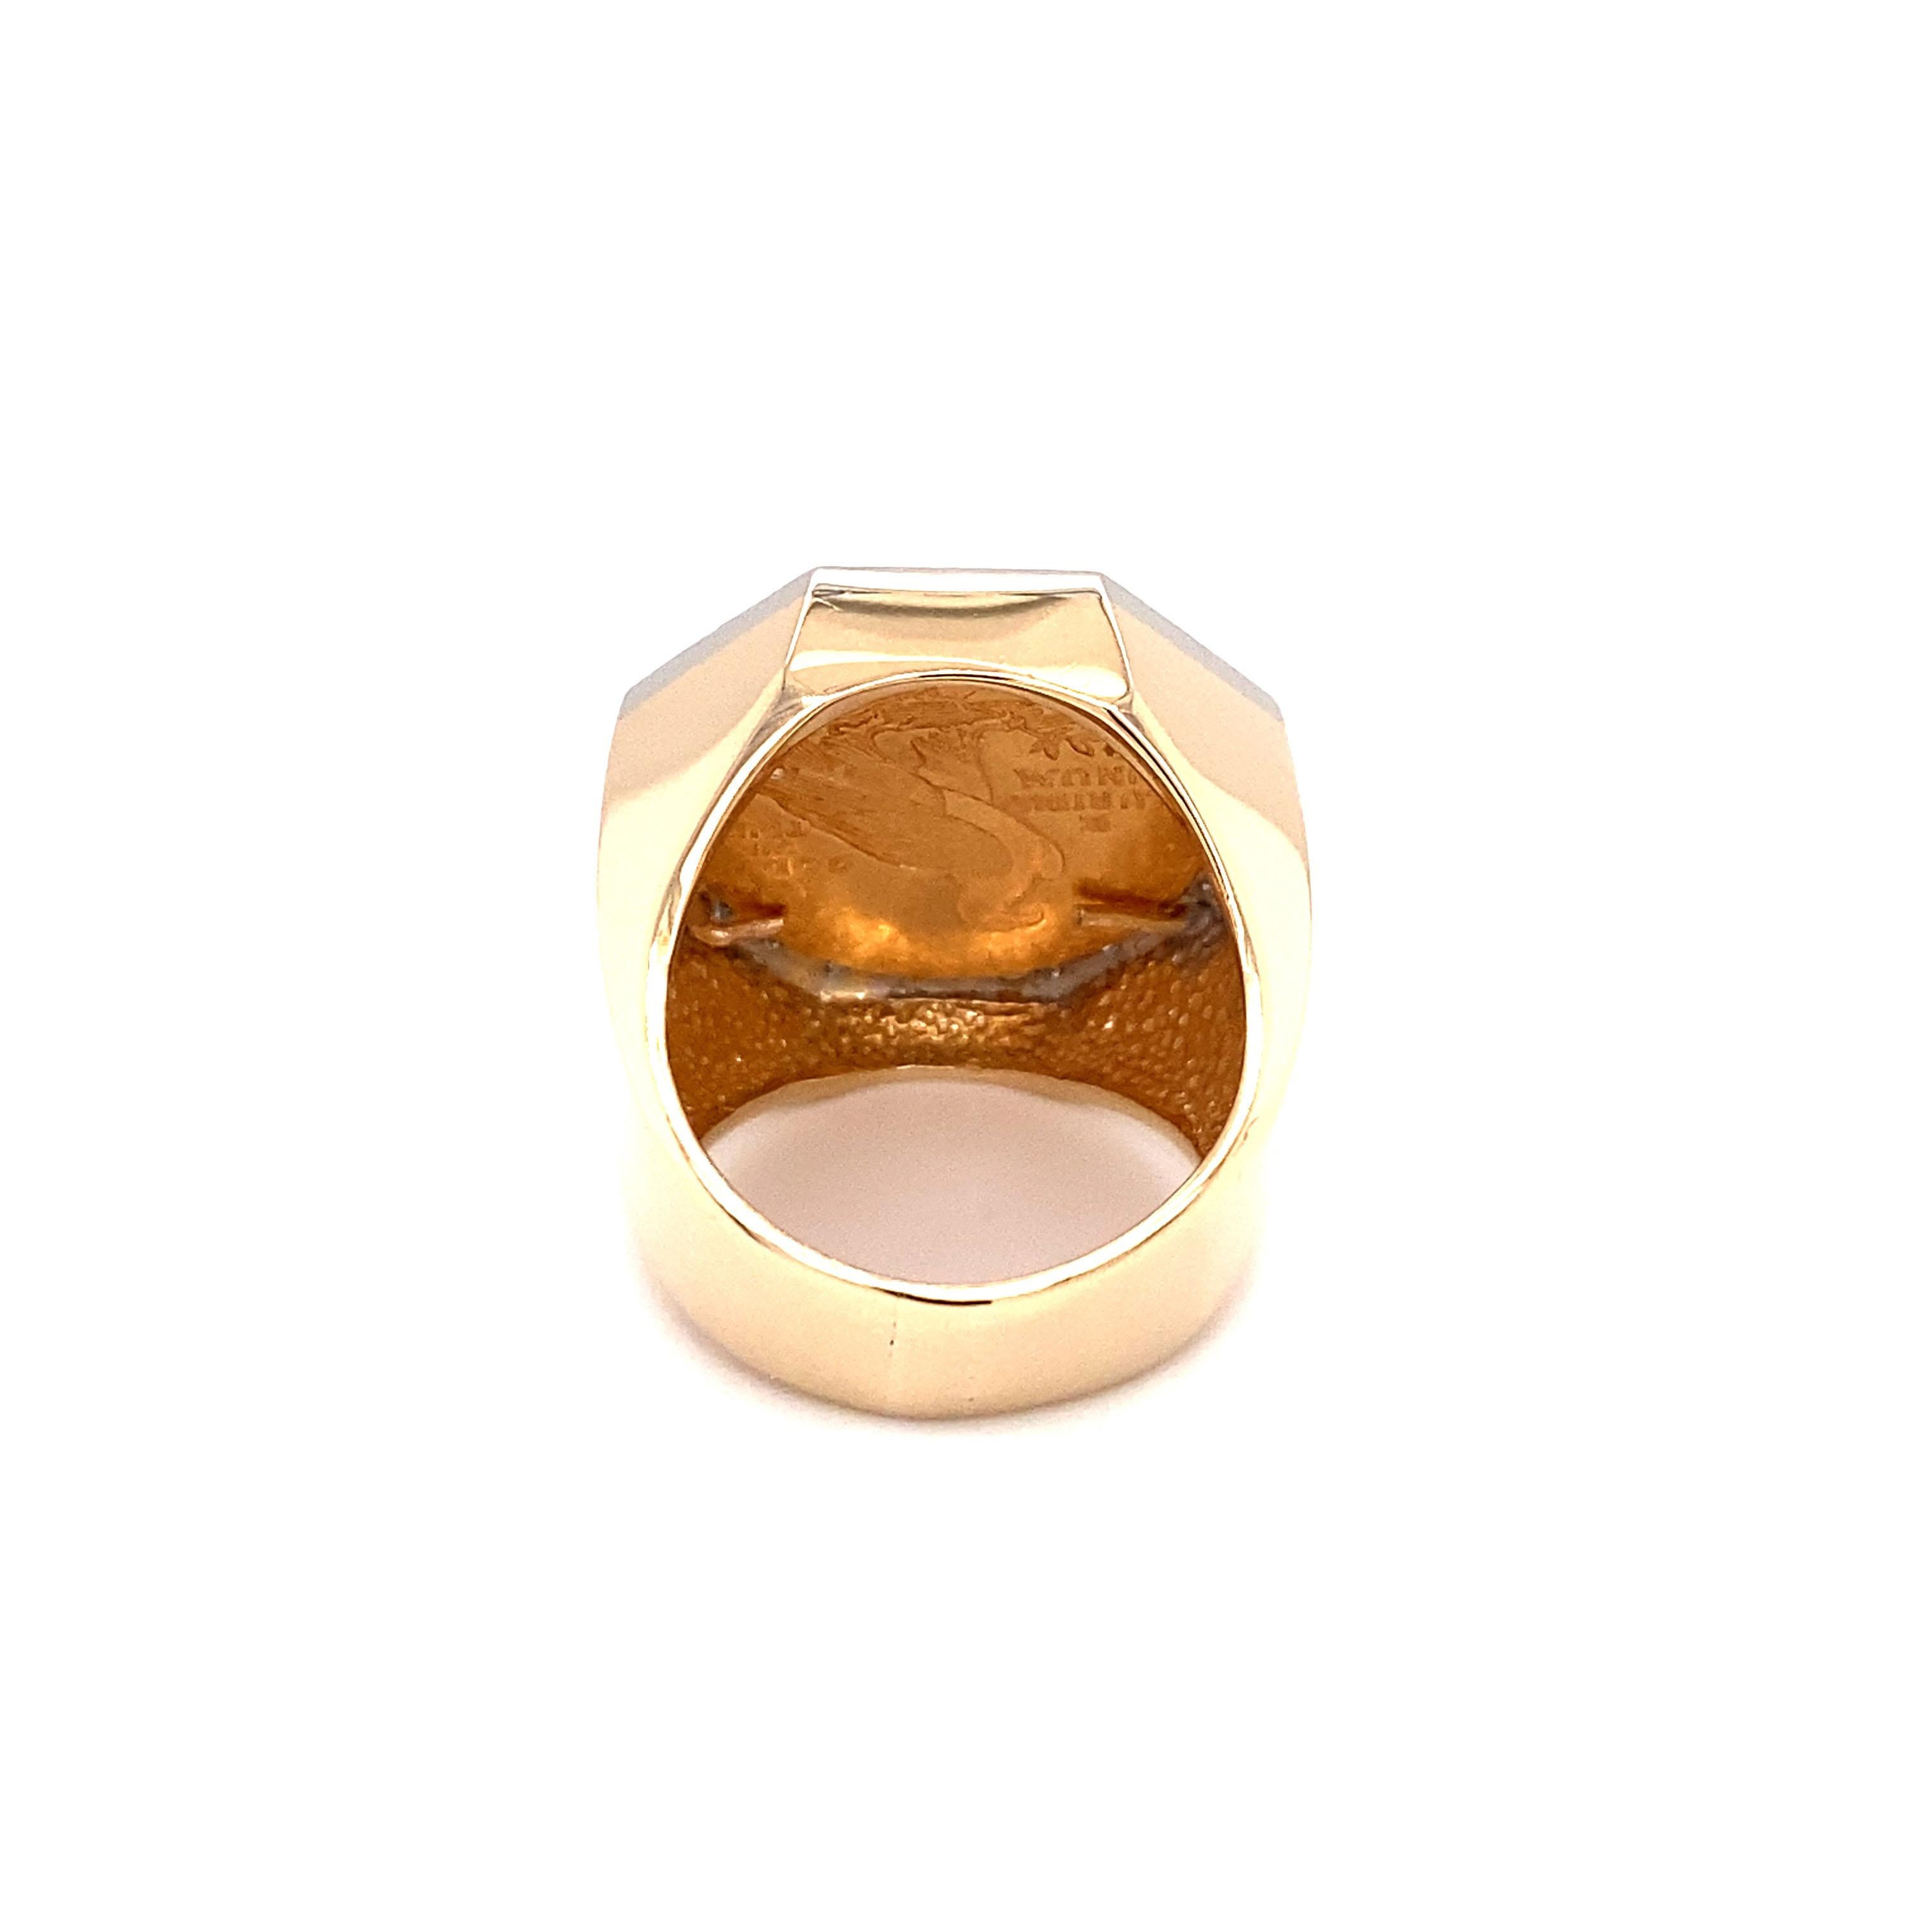 Circa: 1960s
Metal Type: 14K yellow gold
Size: US 7
Weight: 15.2g

Diamond Details:

Cut: Round
Carat: 0.50 carat total weight
Color: H-I
Clarity: SI